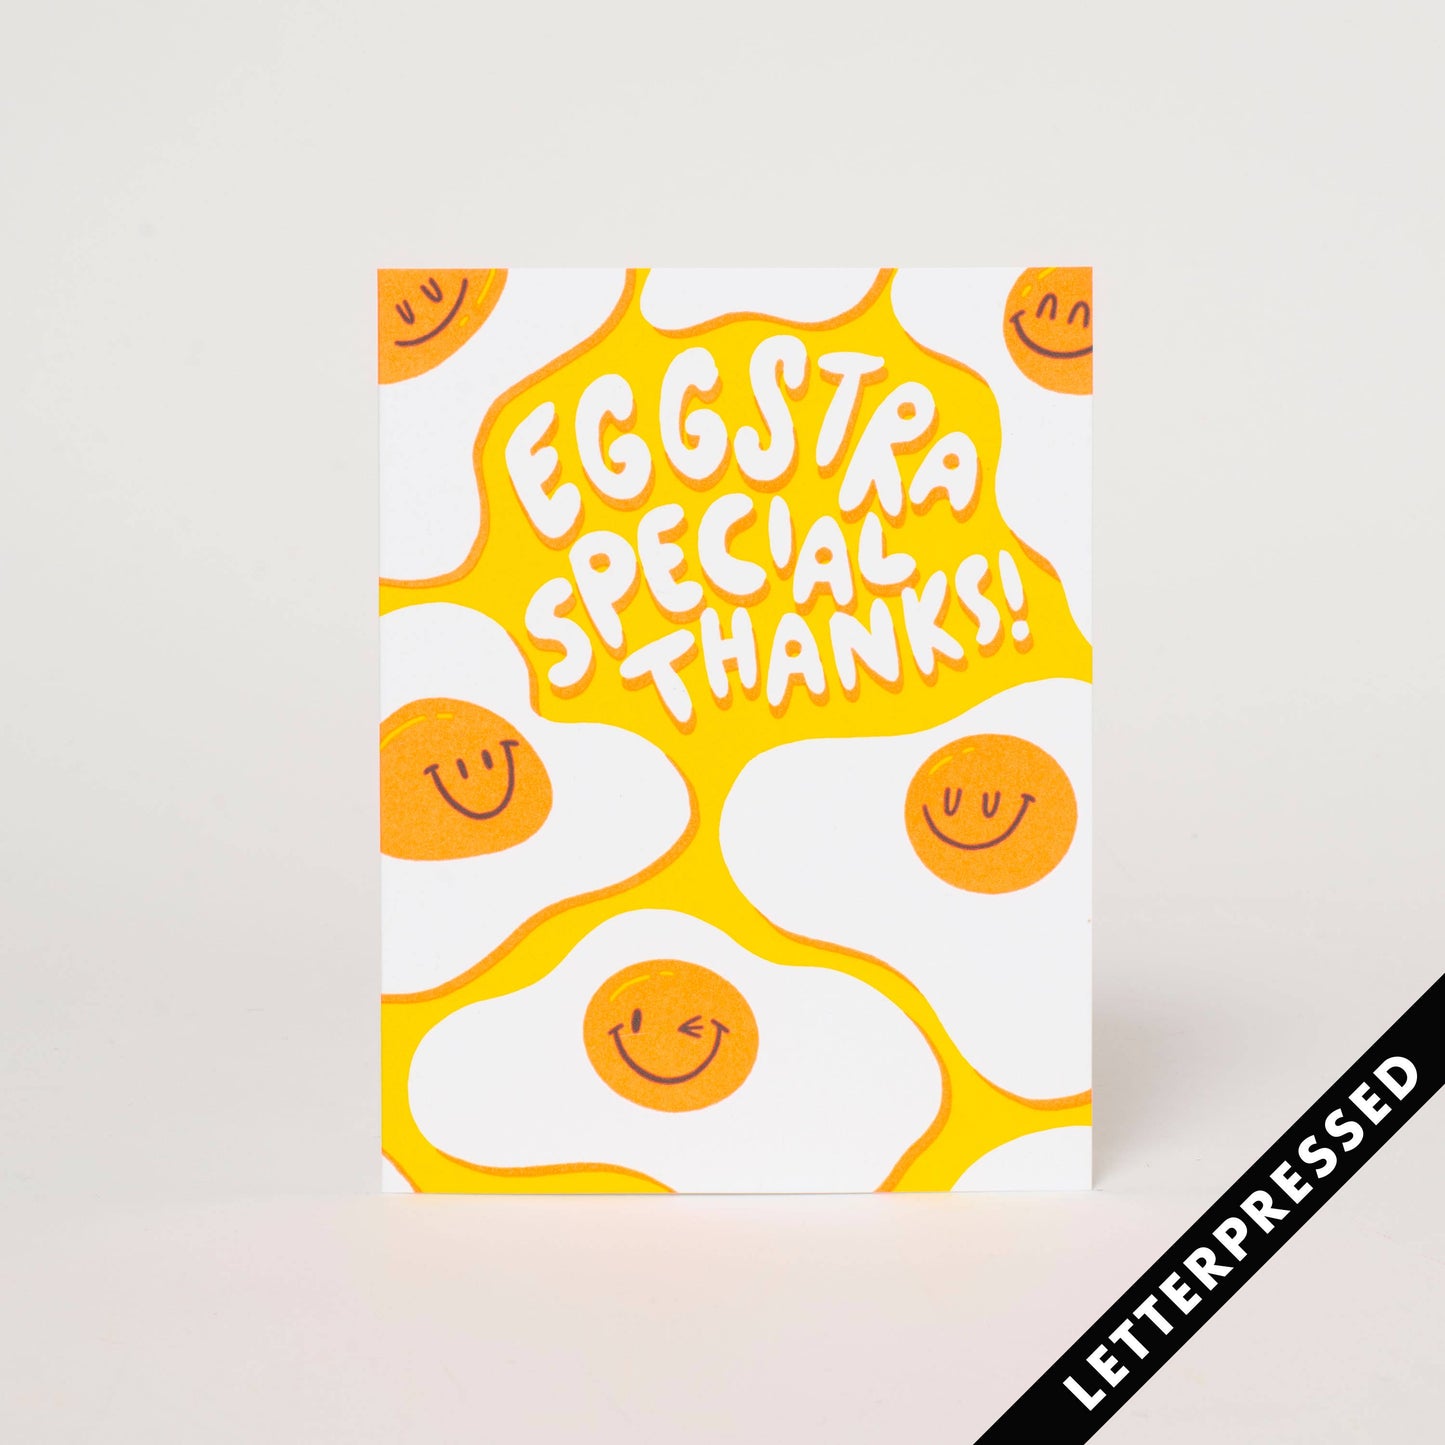 Letterpress printed greeting card with image of smiling fried eggs on bright yellow background and text "Eggstra Special Thanks!"